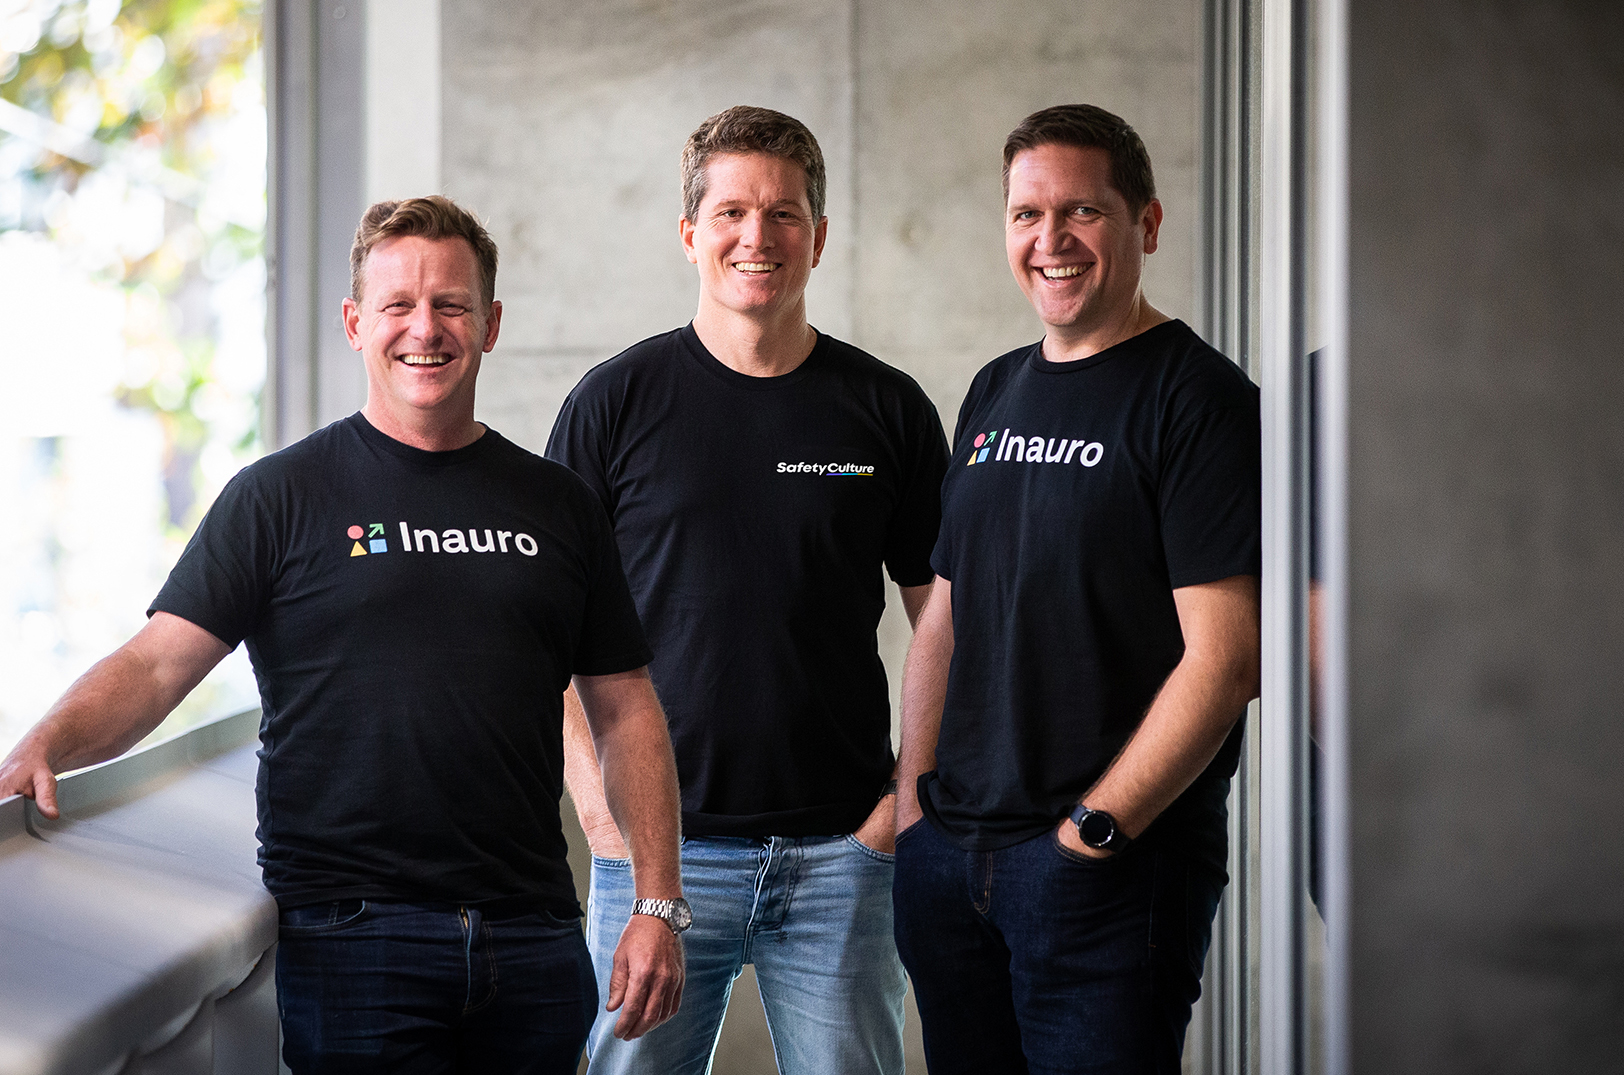 SafetyCulture invests $2.1M in IoT startup Inauro, growing tech portfolio focused on frontline safety